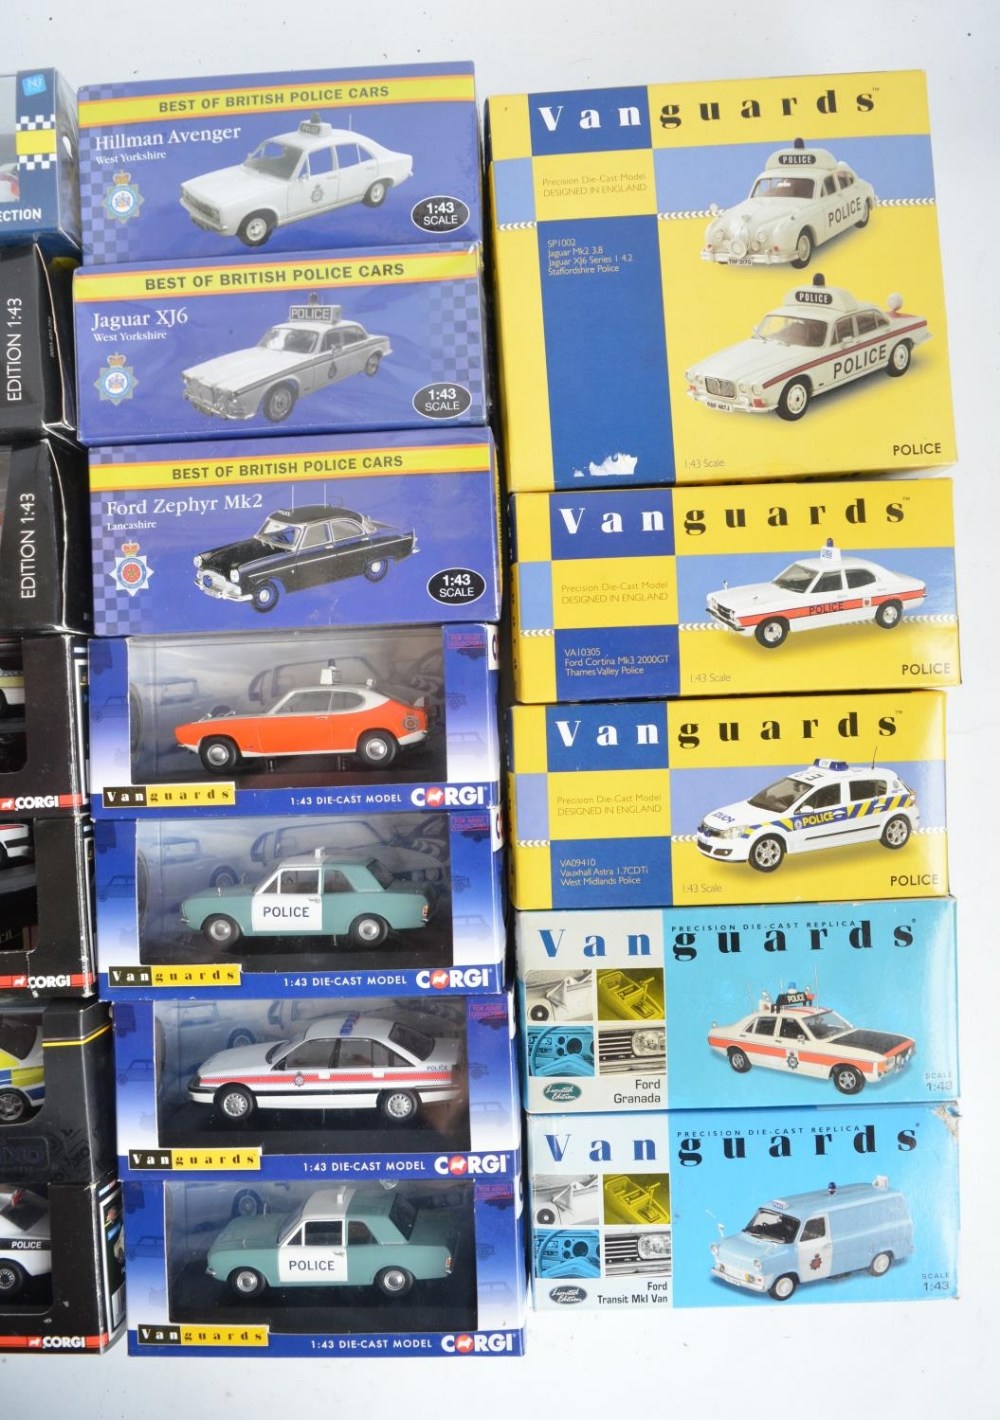 Collection of diecast model Police cars and vehicles from Corgi, Corgi Vanguards, Atlas Editions, - Image 2 of 8